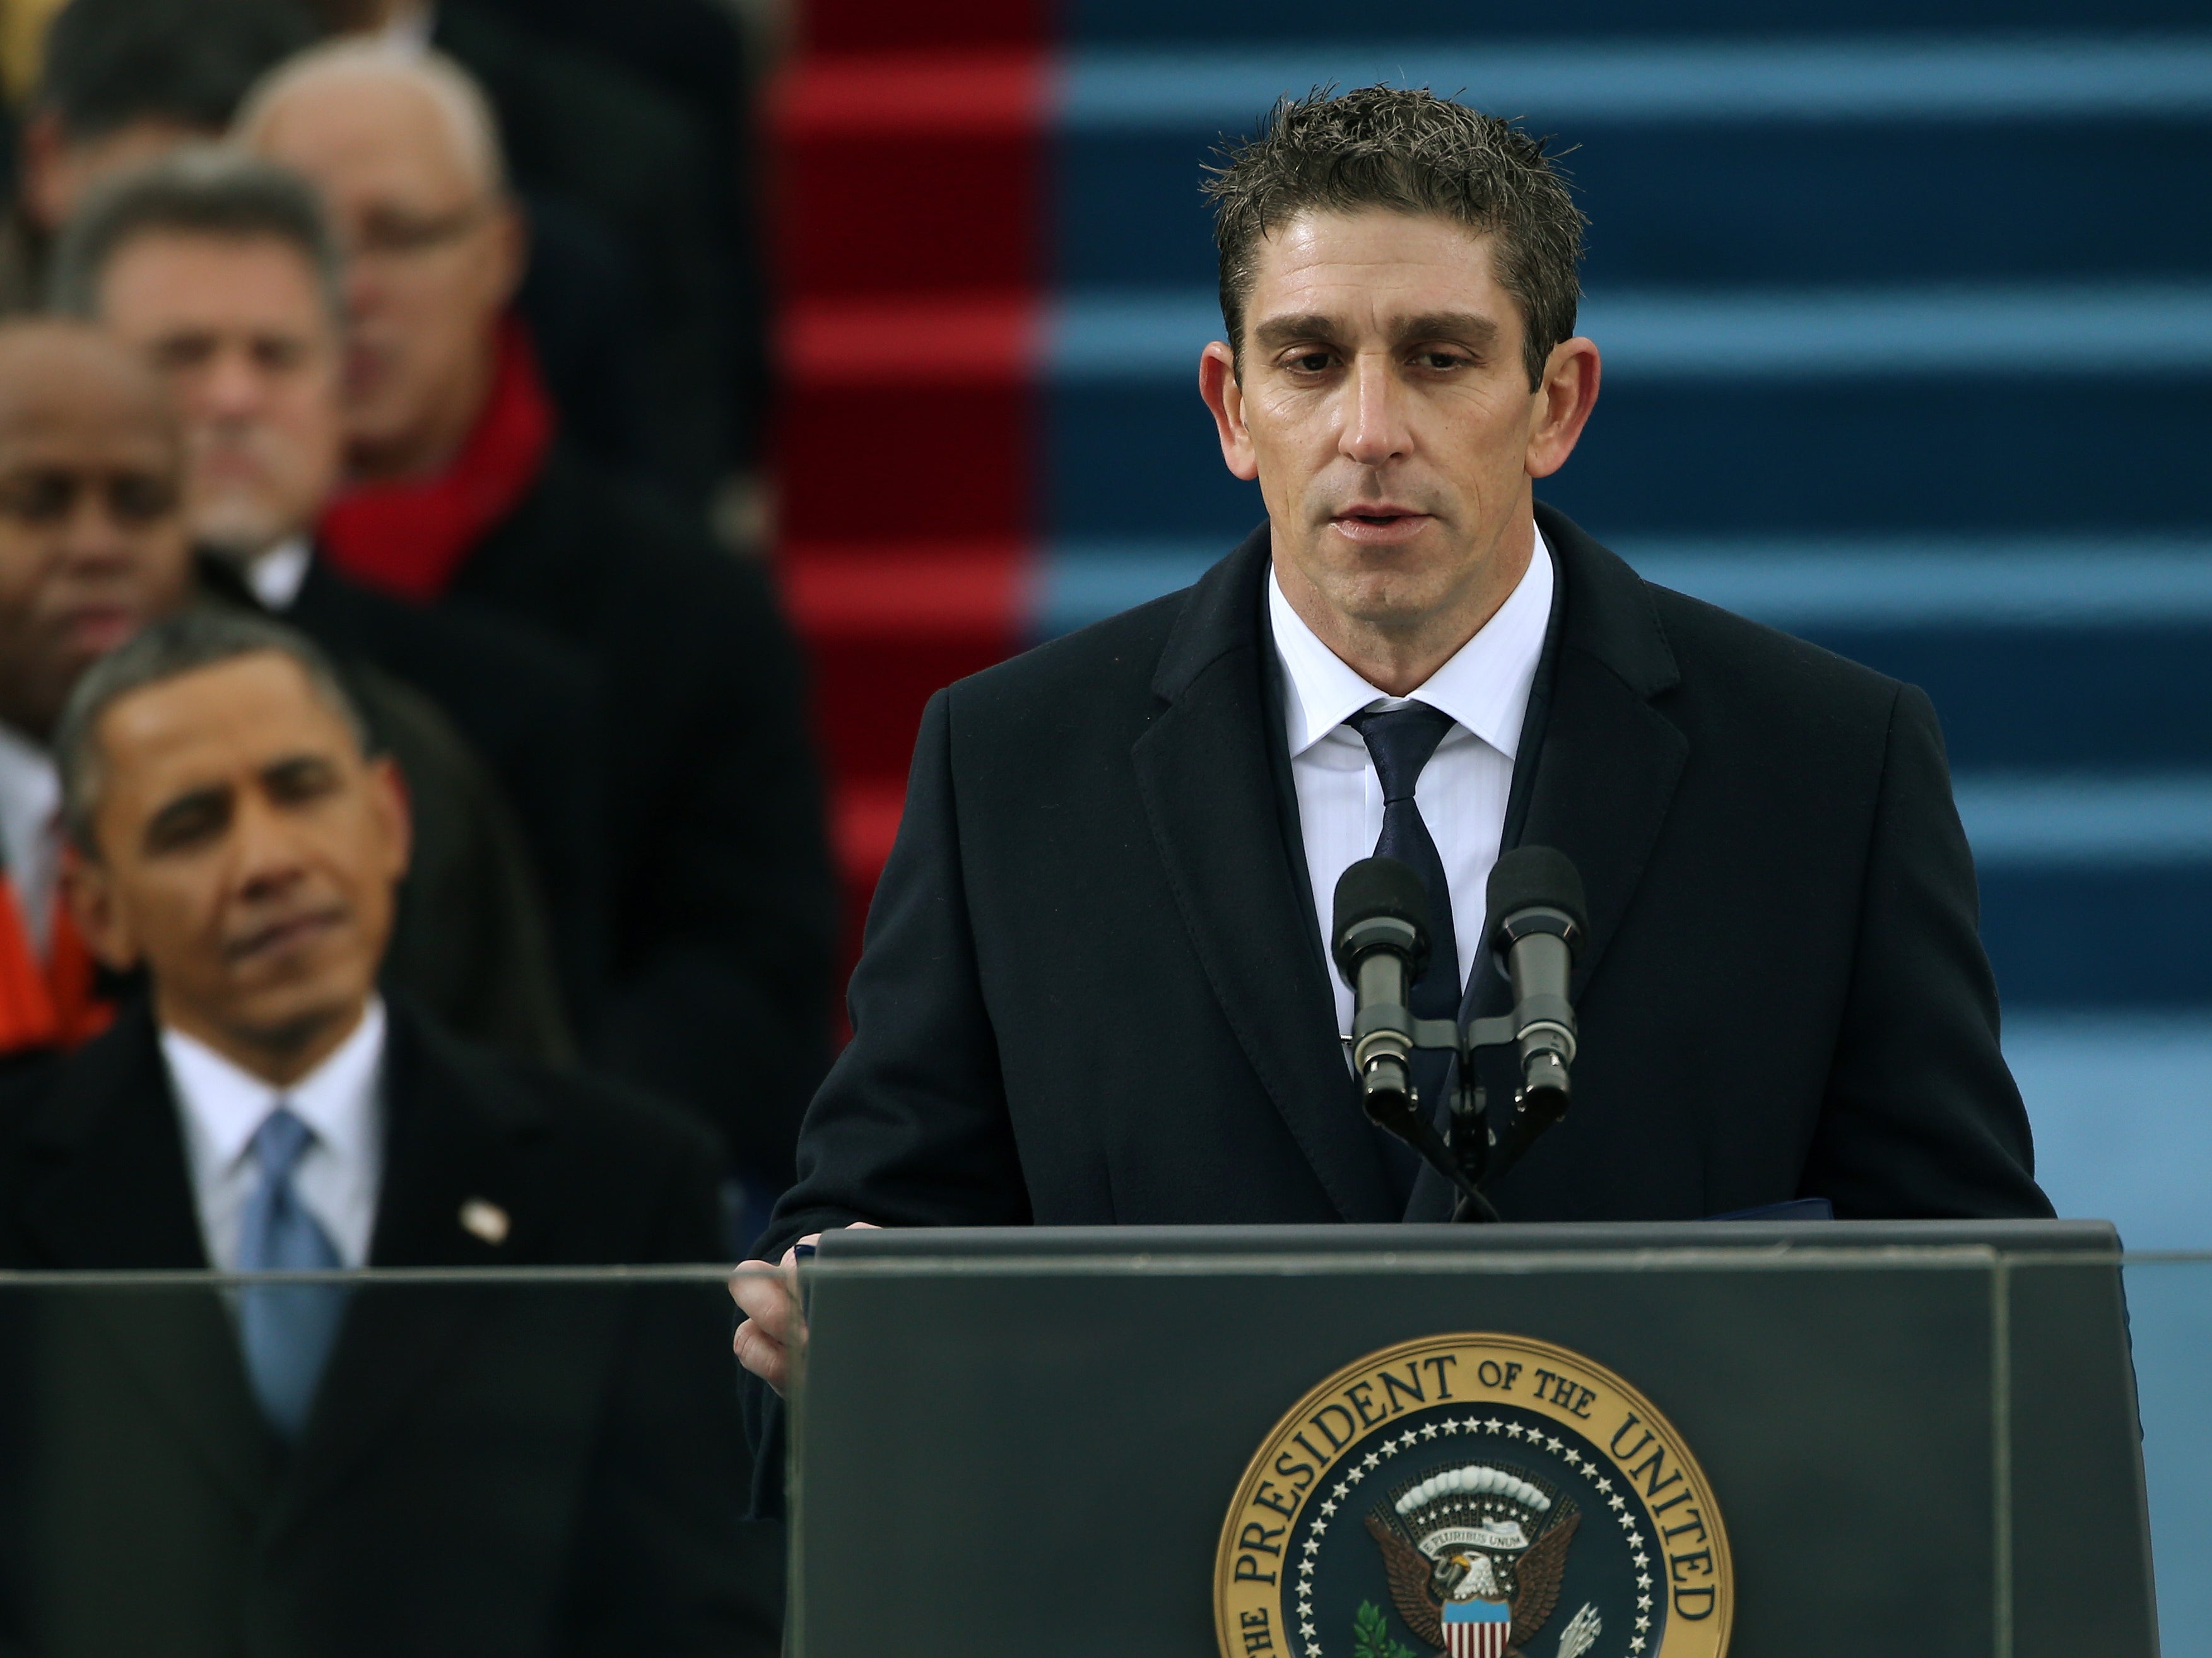 Richard Blanco reads a poem during Barack Obama’s second presidential inauguration on 21 January 2013 in Washington, DC